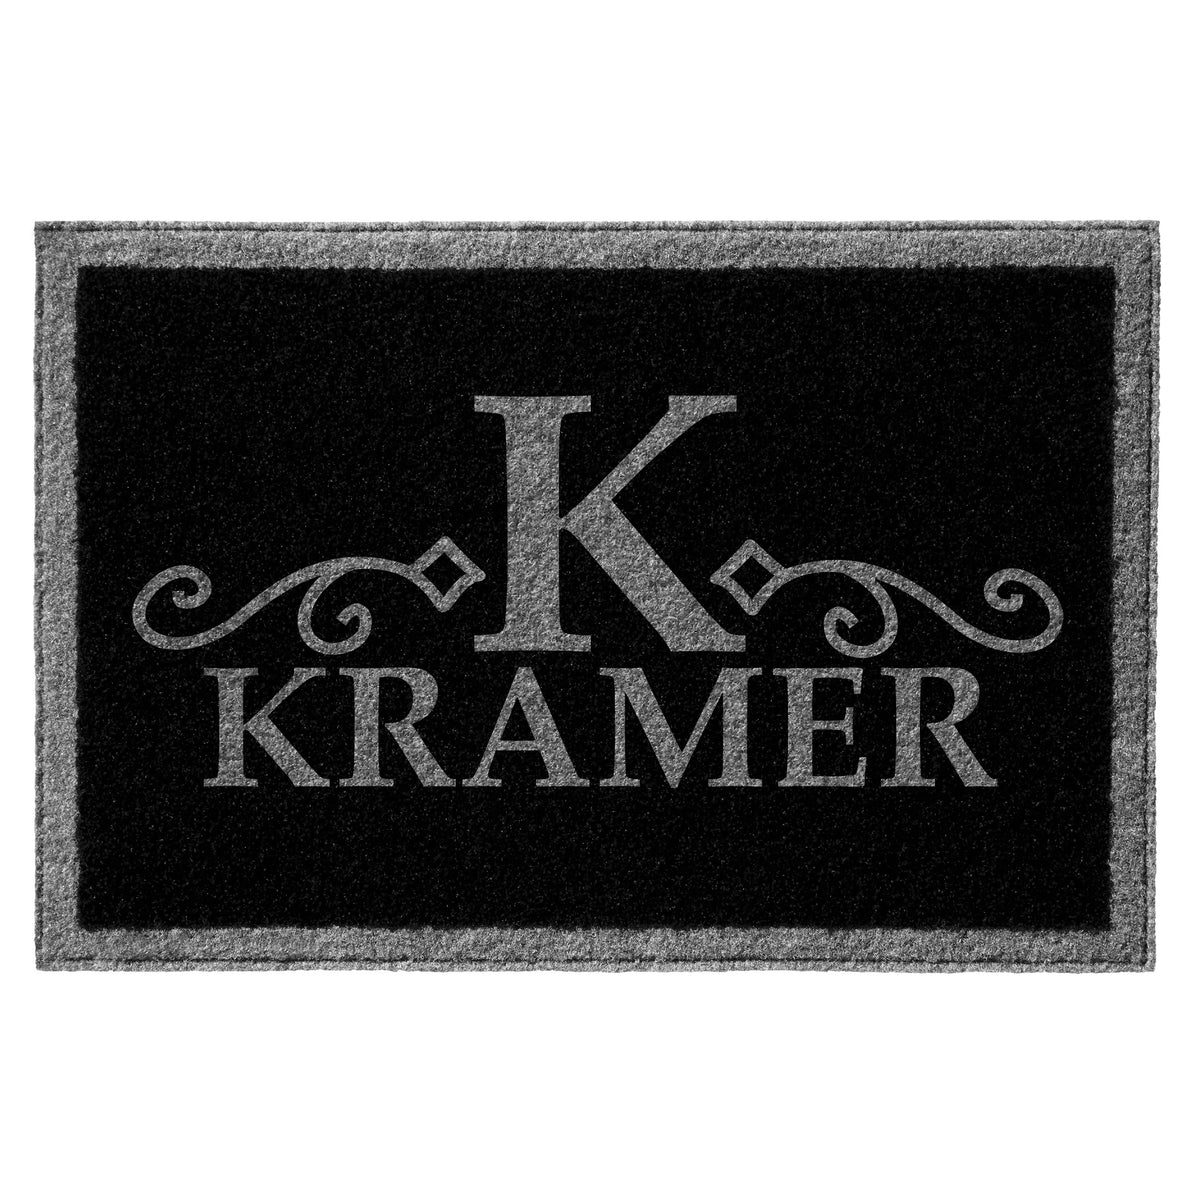 Infinity Custom Mats™ All-Weather Personalized Door Mat - STYLE: KRAMER COLOR: BLACK / GREY - rugsthatfit.com